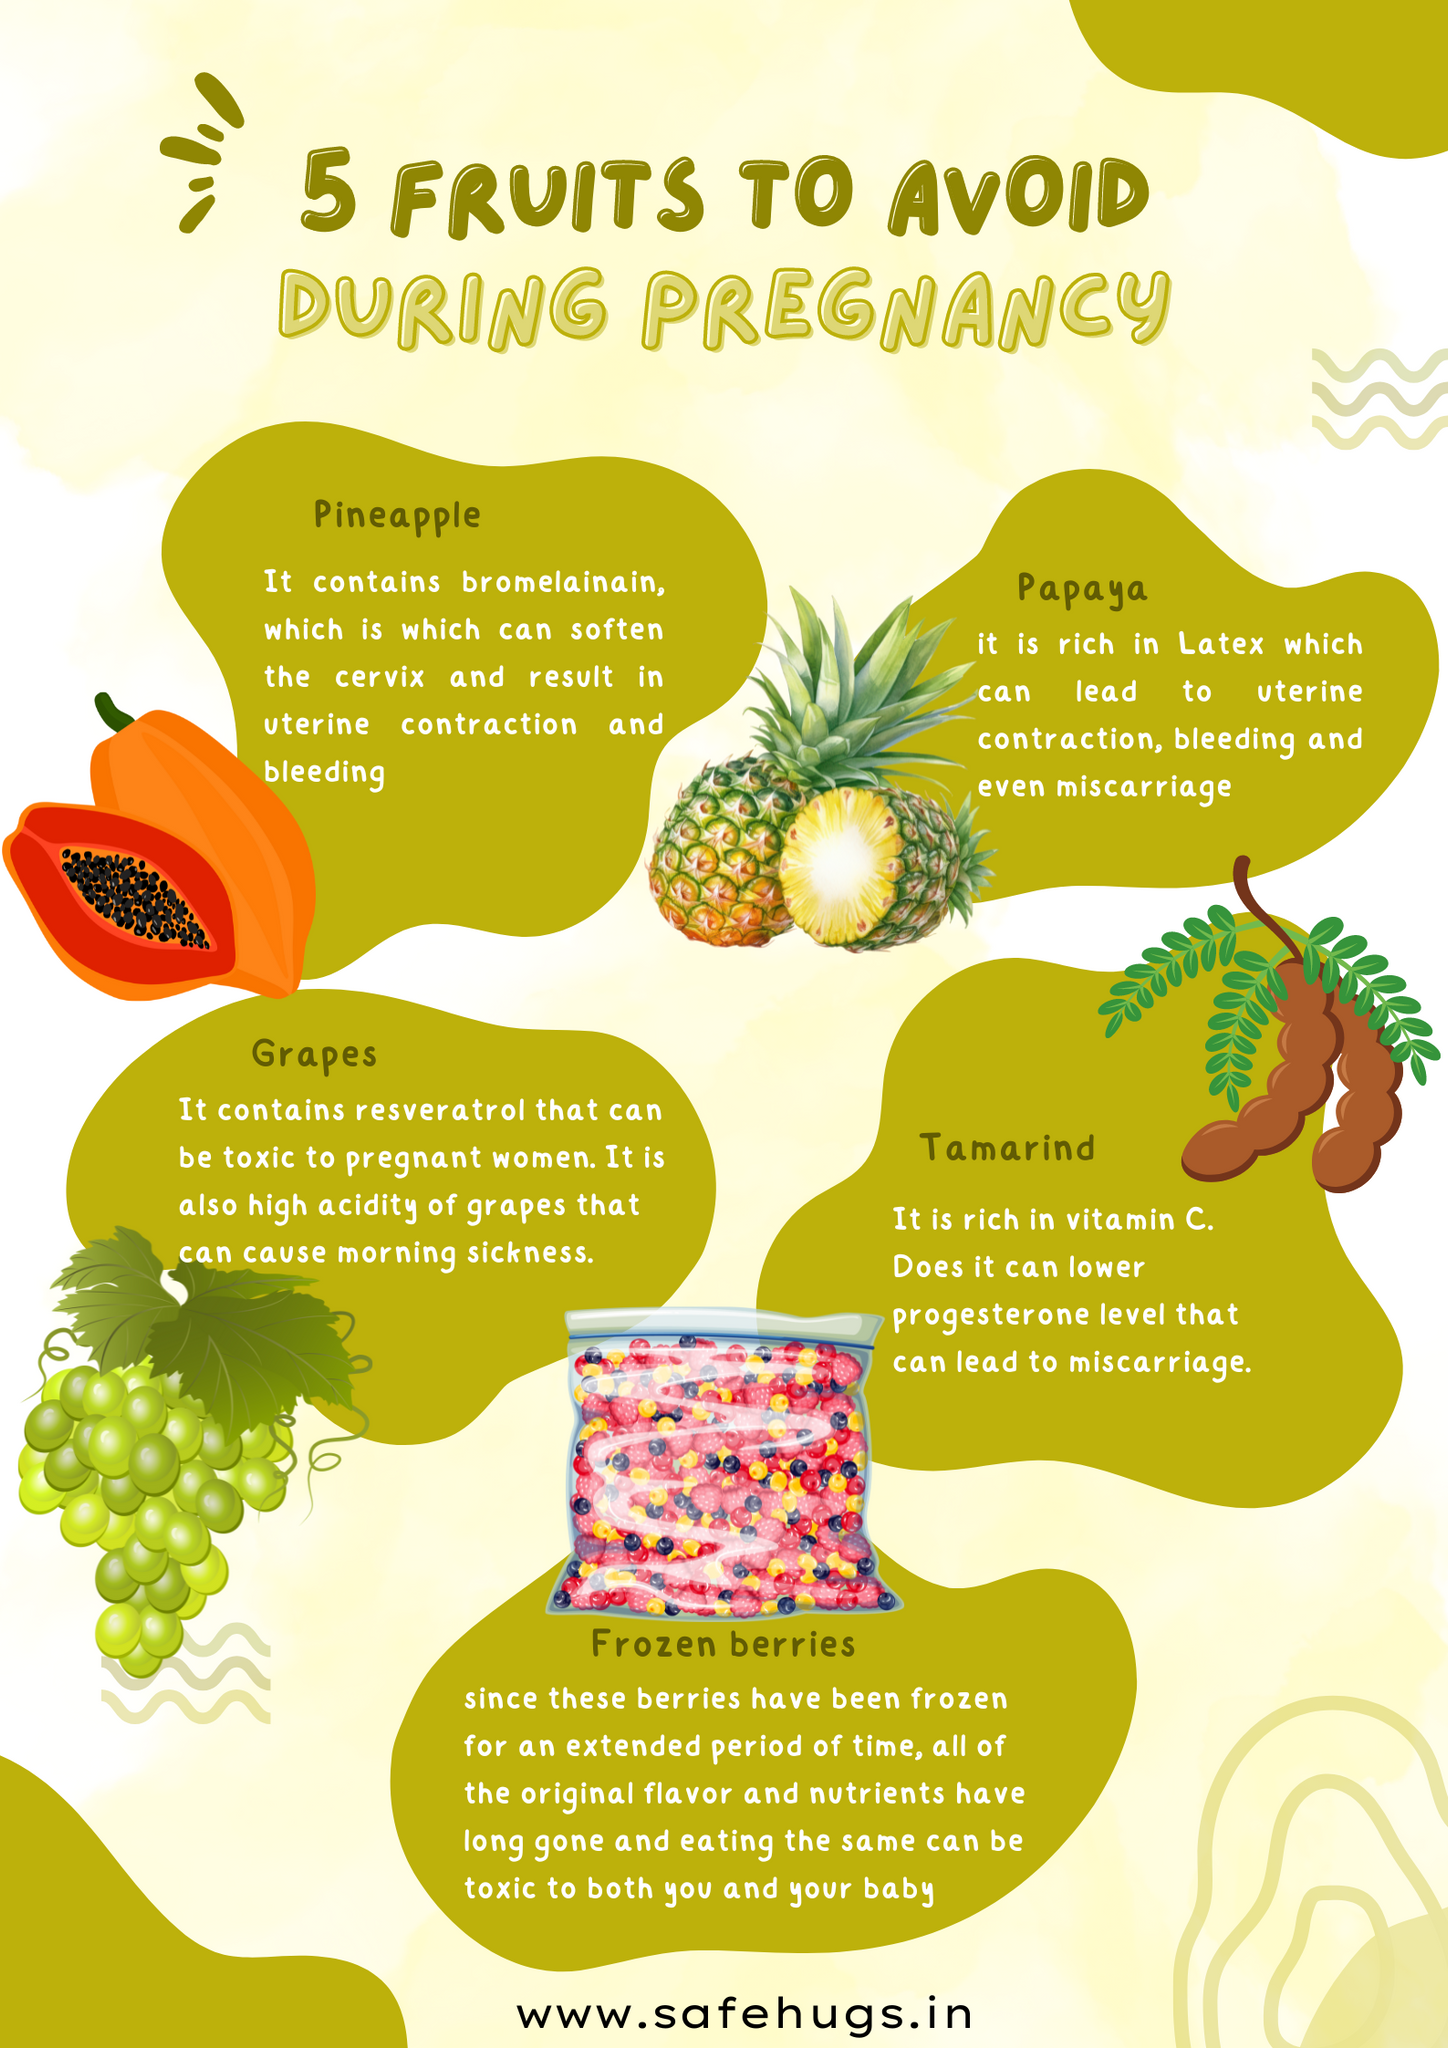 Fruits to Avoid During Pregnancy